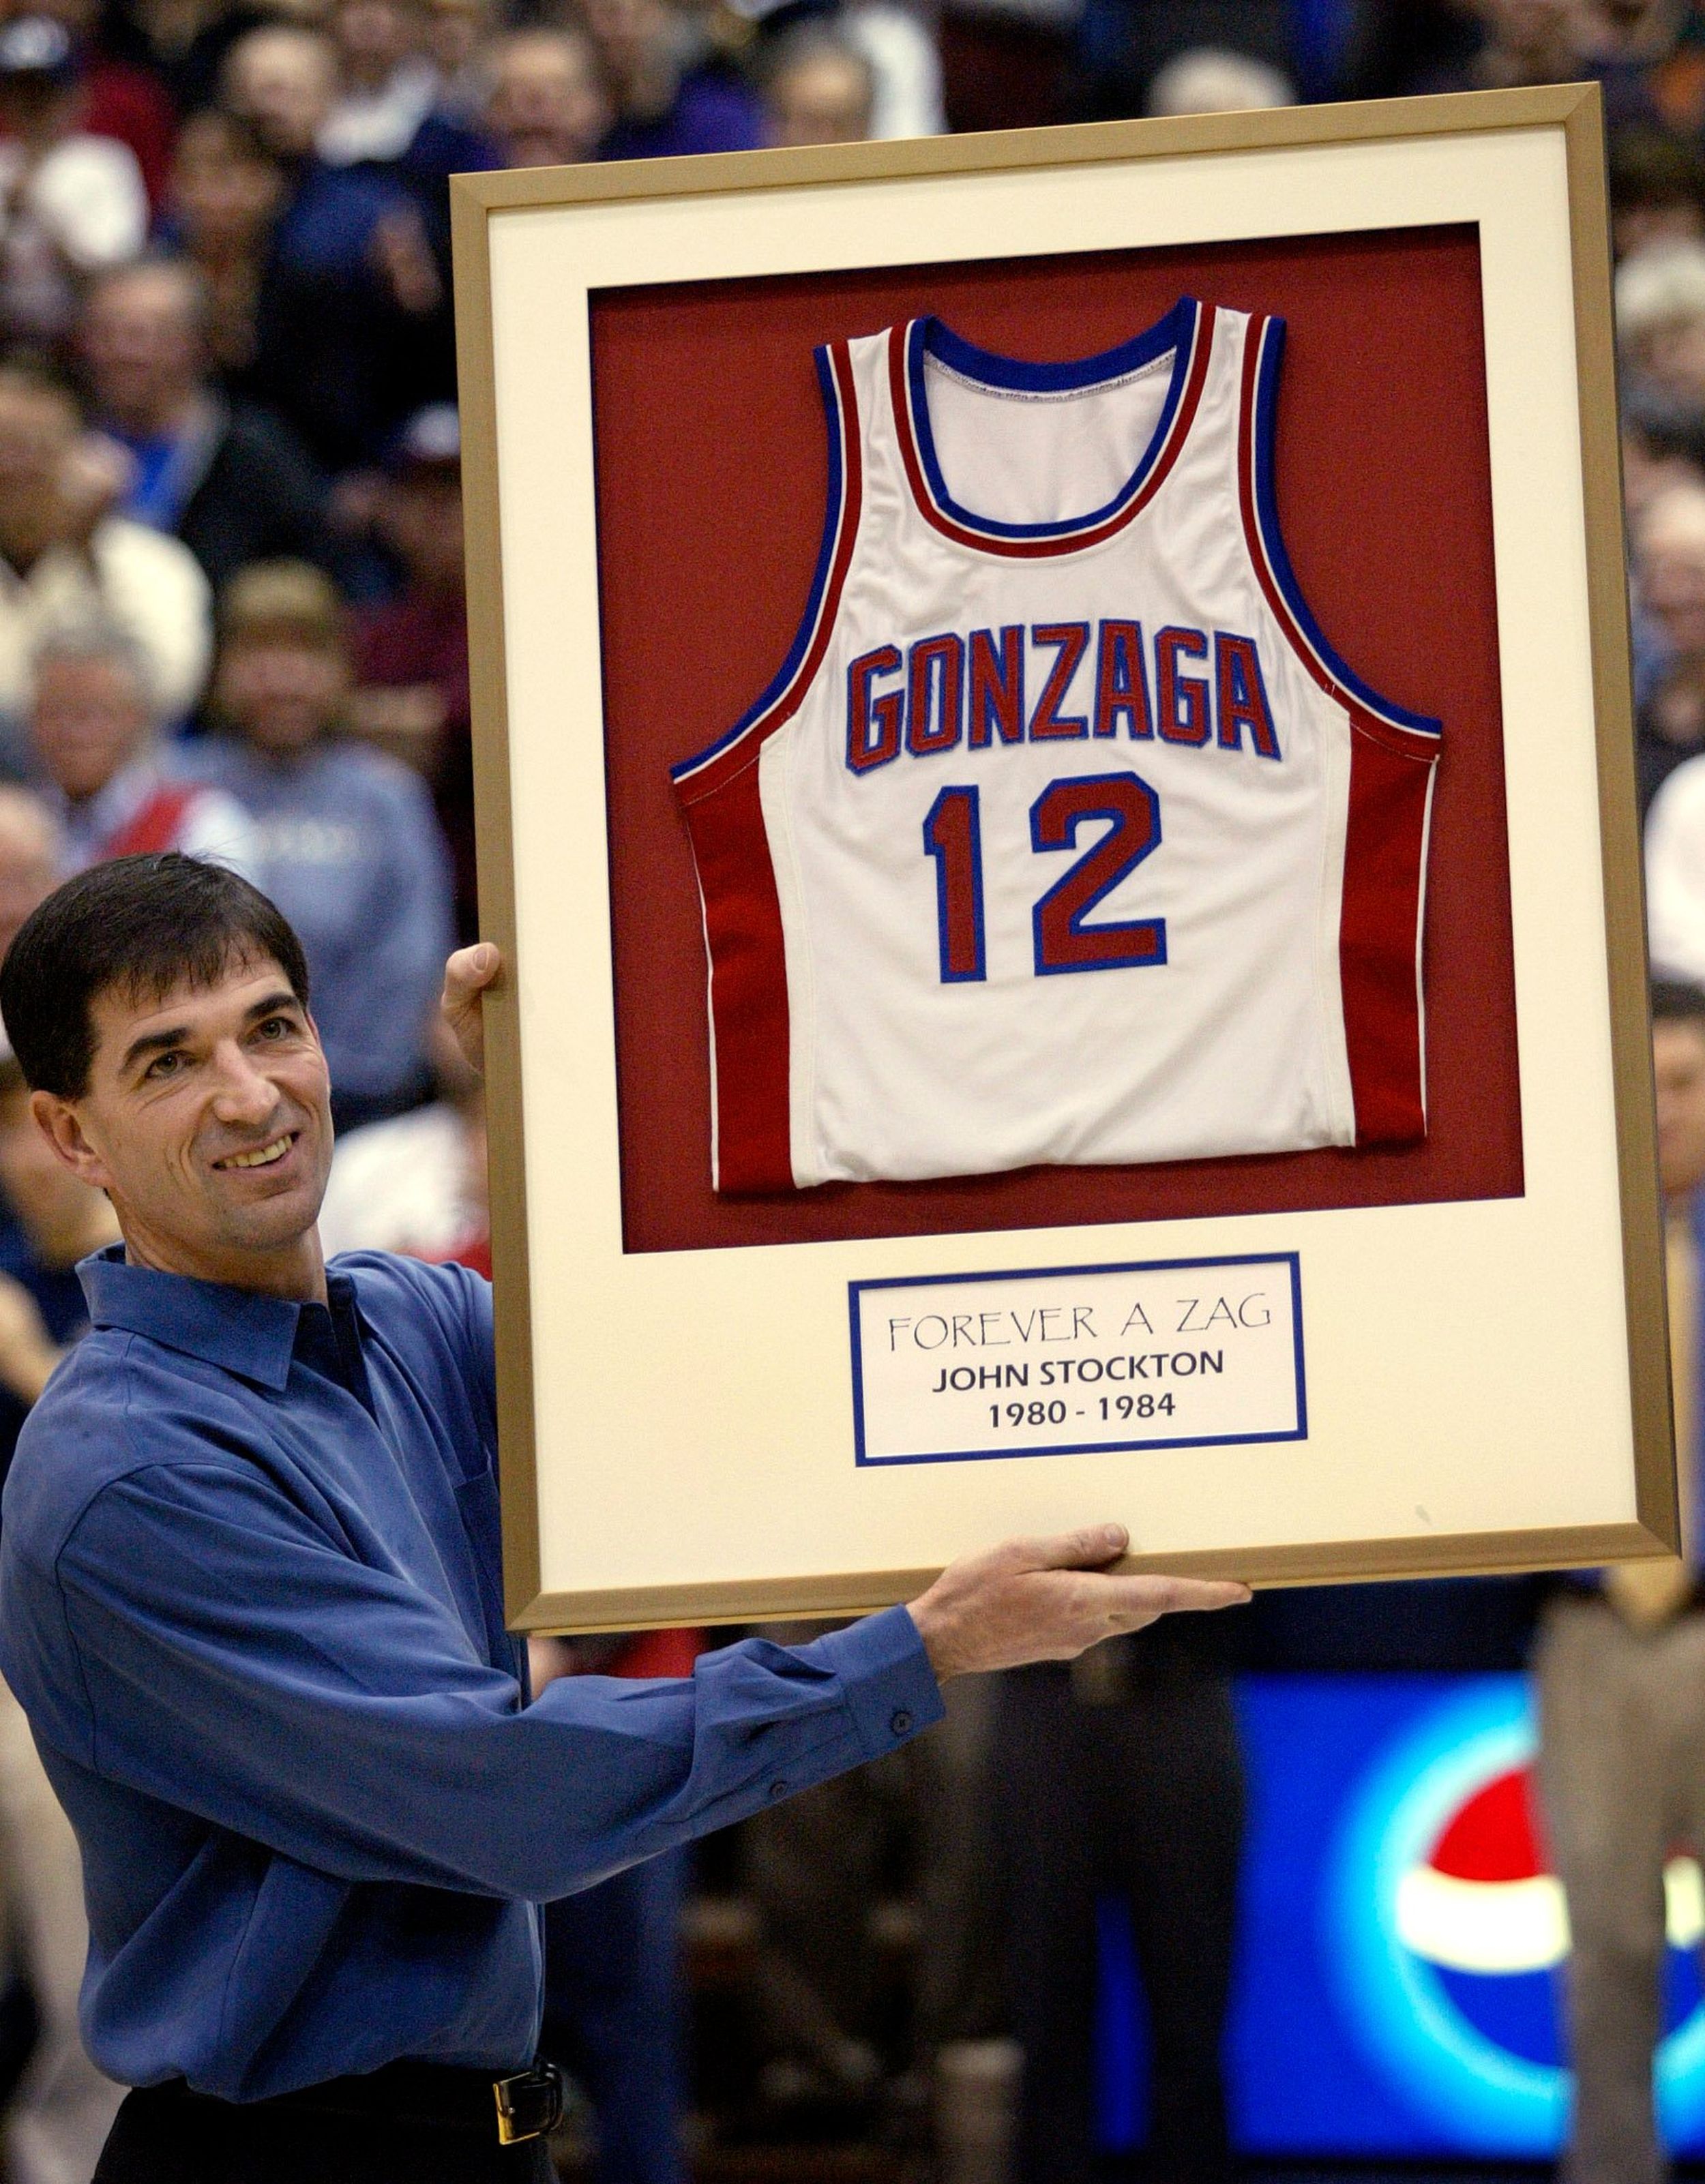 He's just a Zag, man:' The untold stories of Drew Timme's singular,  legendary Gonzaga career 